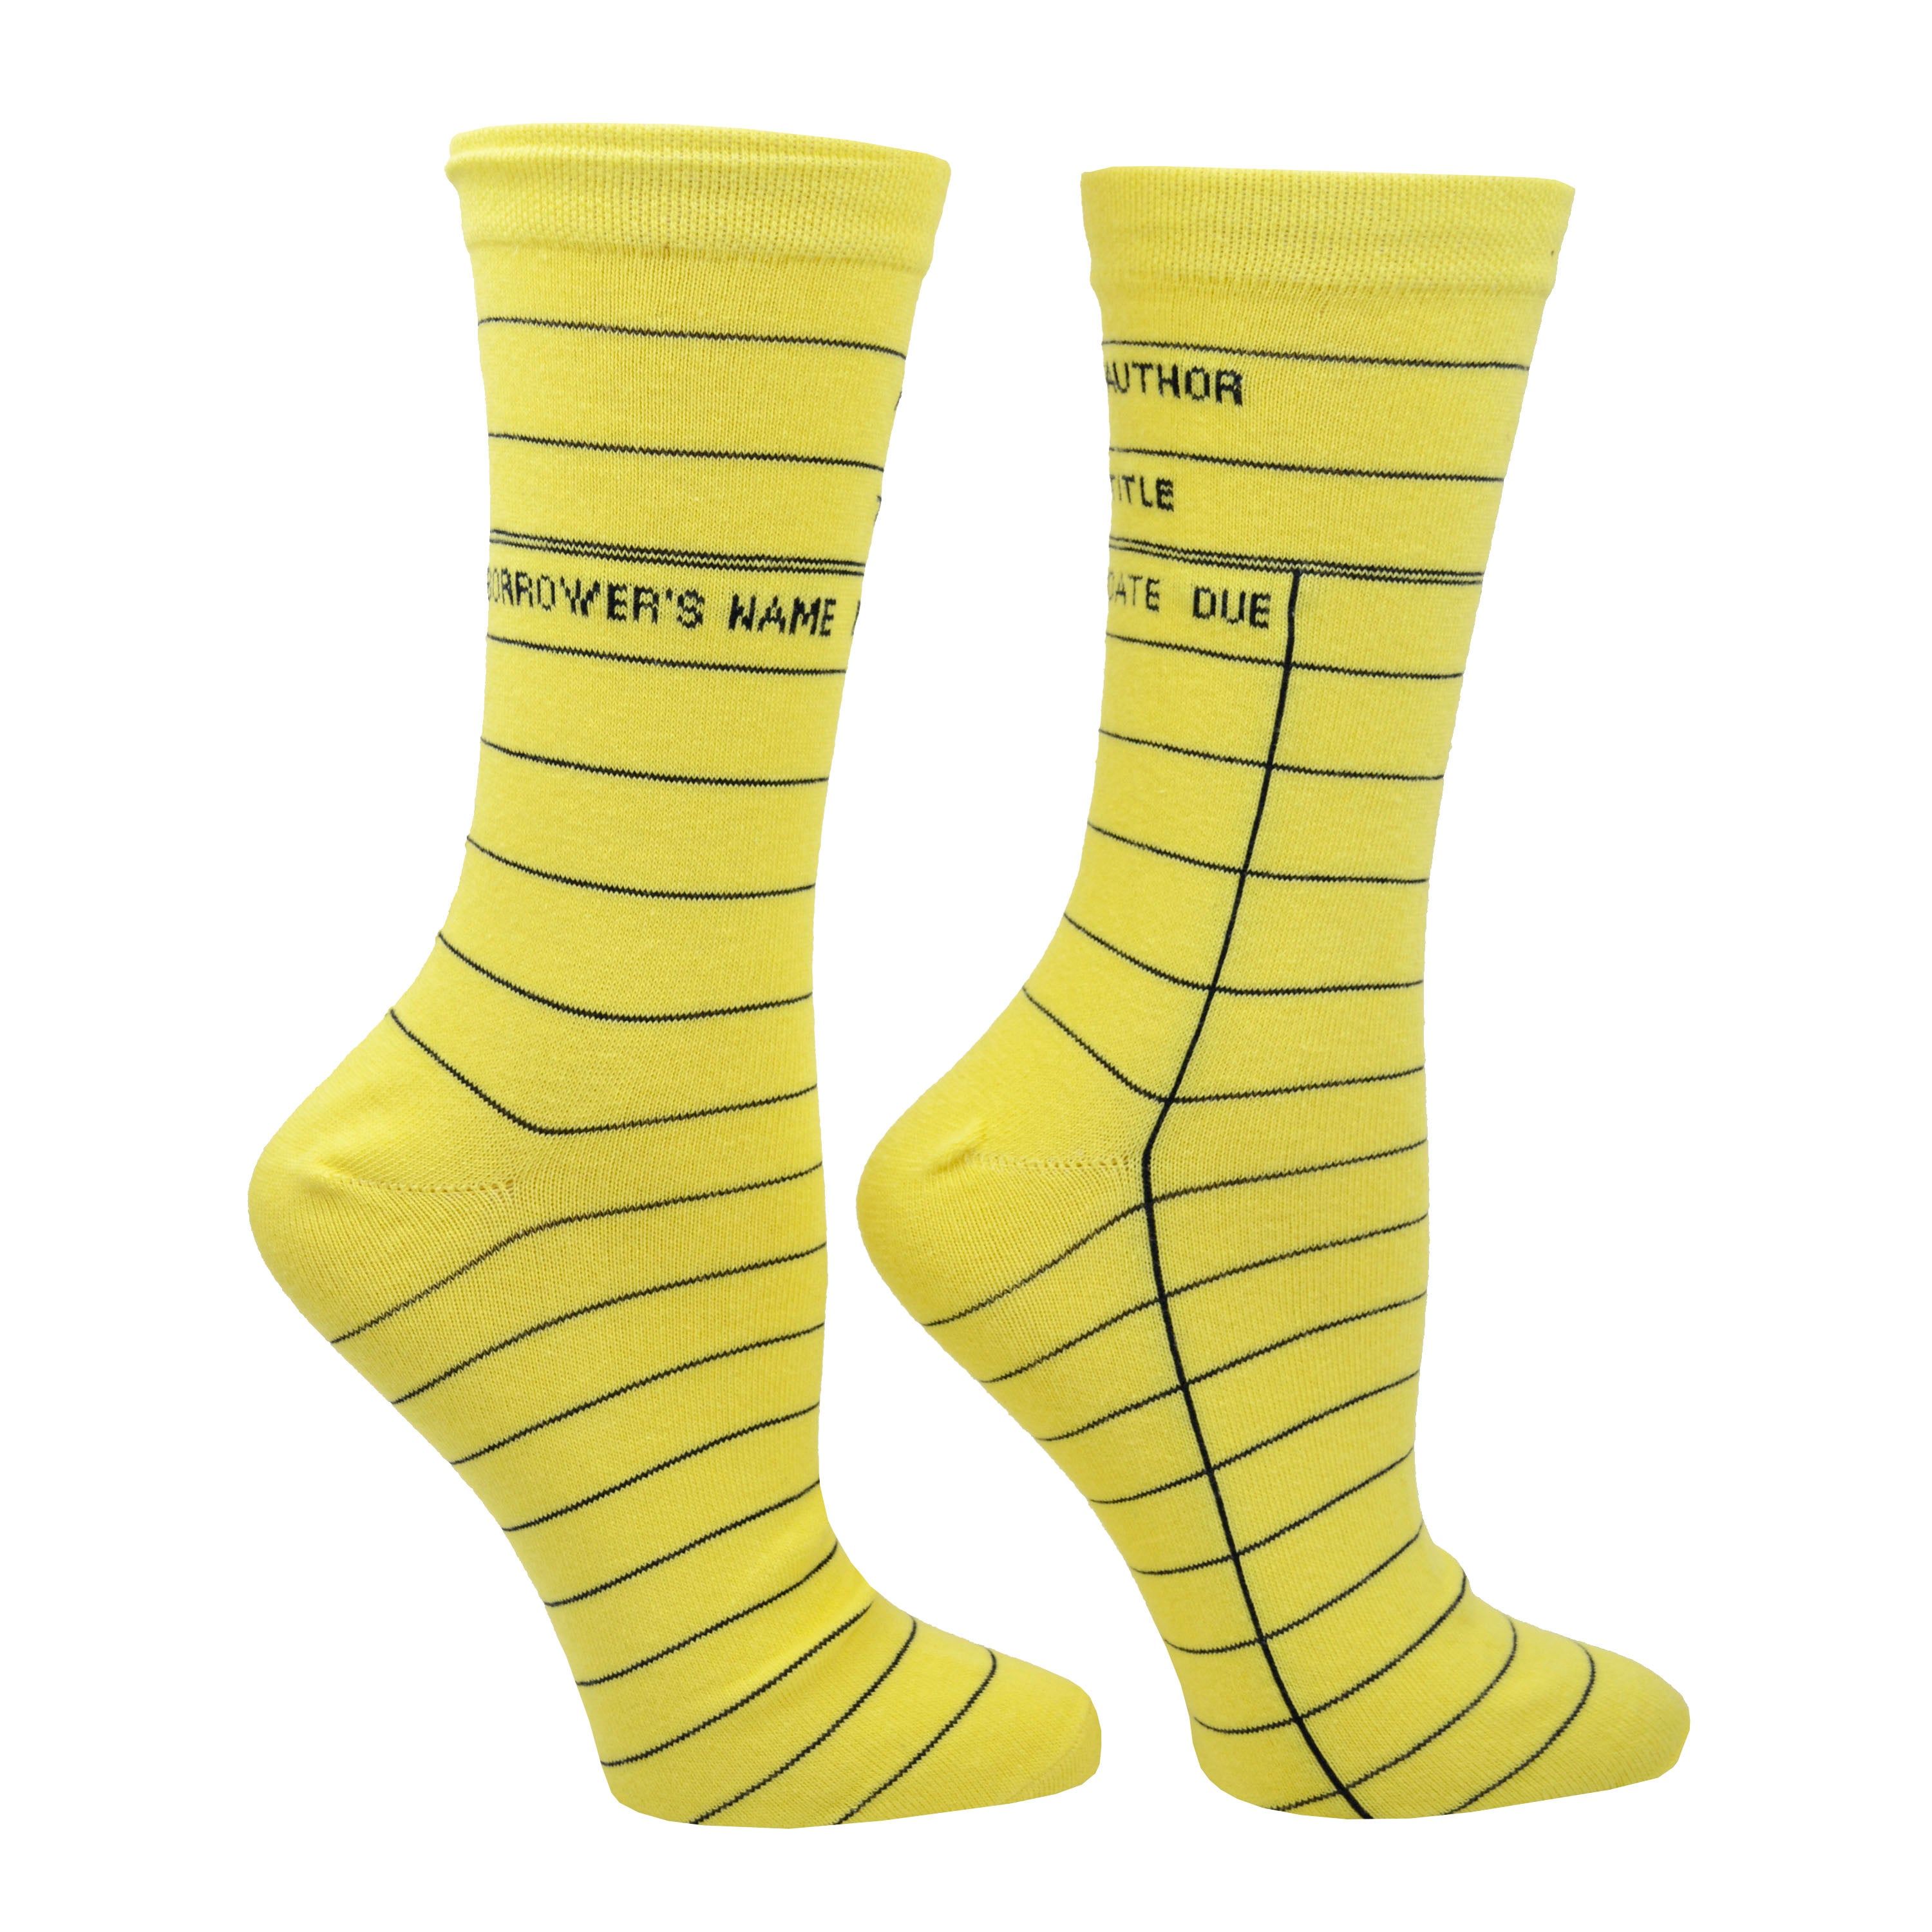 A side view shown on a leg form in the women's size, these yellow cotton unisex crew socks by the brand Out of Print feature the iconic library card design with the words 